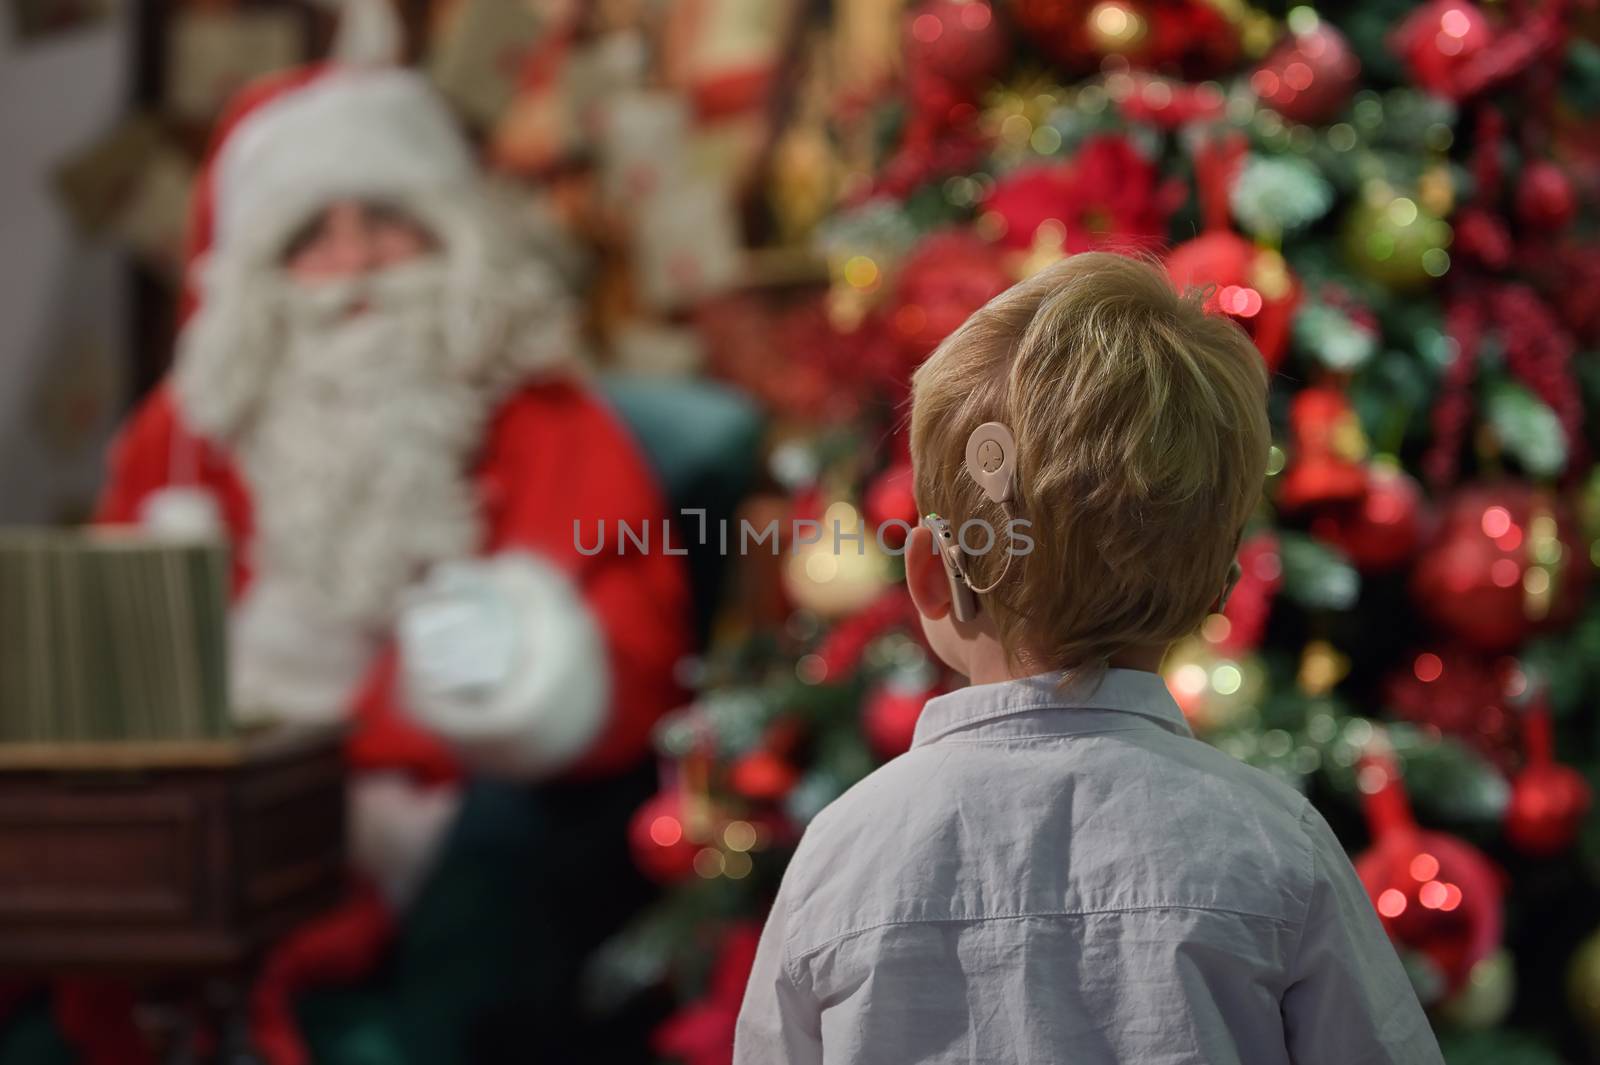 A Boy with Cochlear Implants and Santa Claus  by mady70